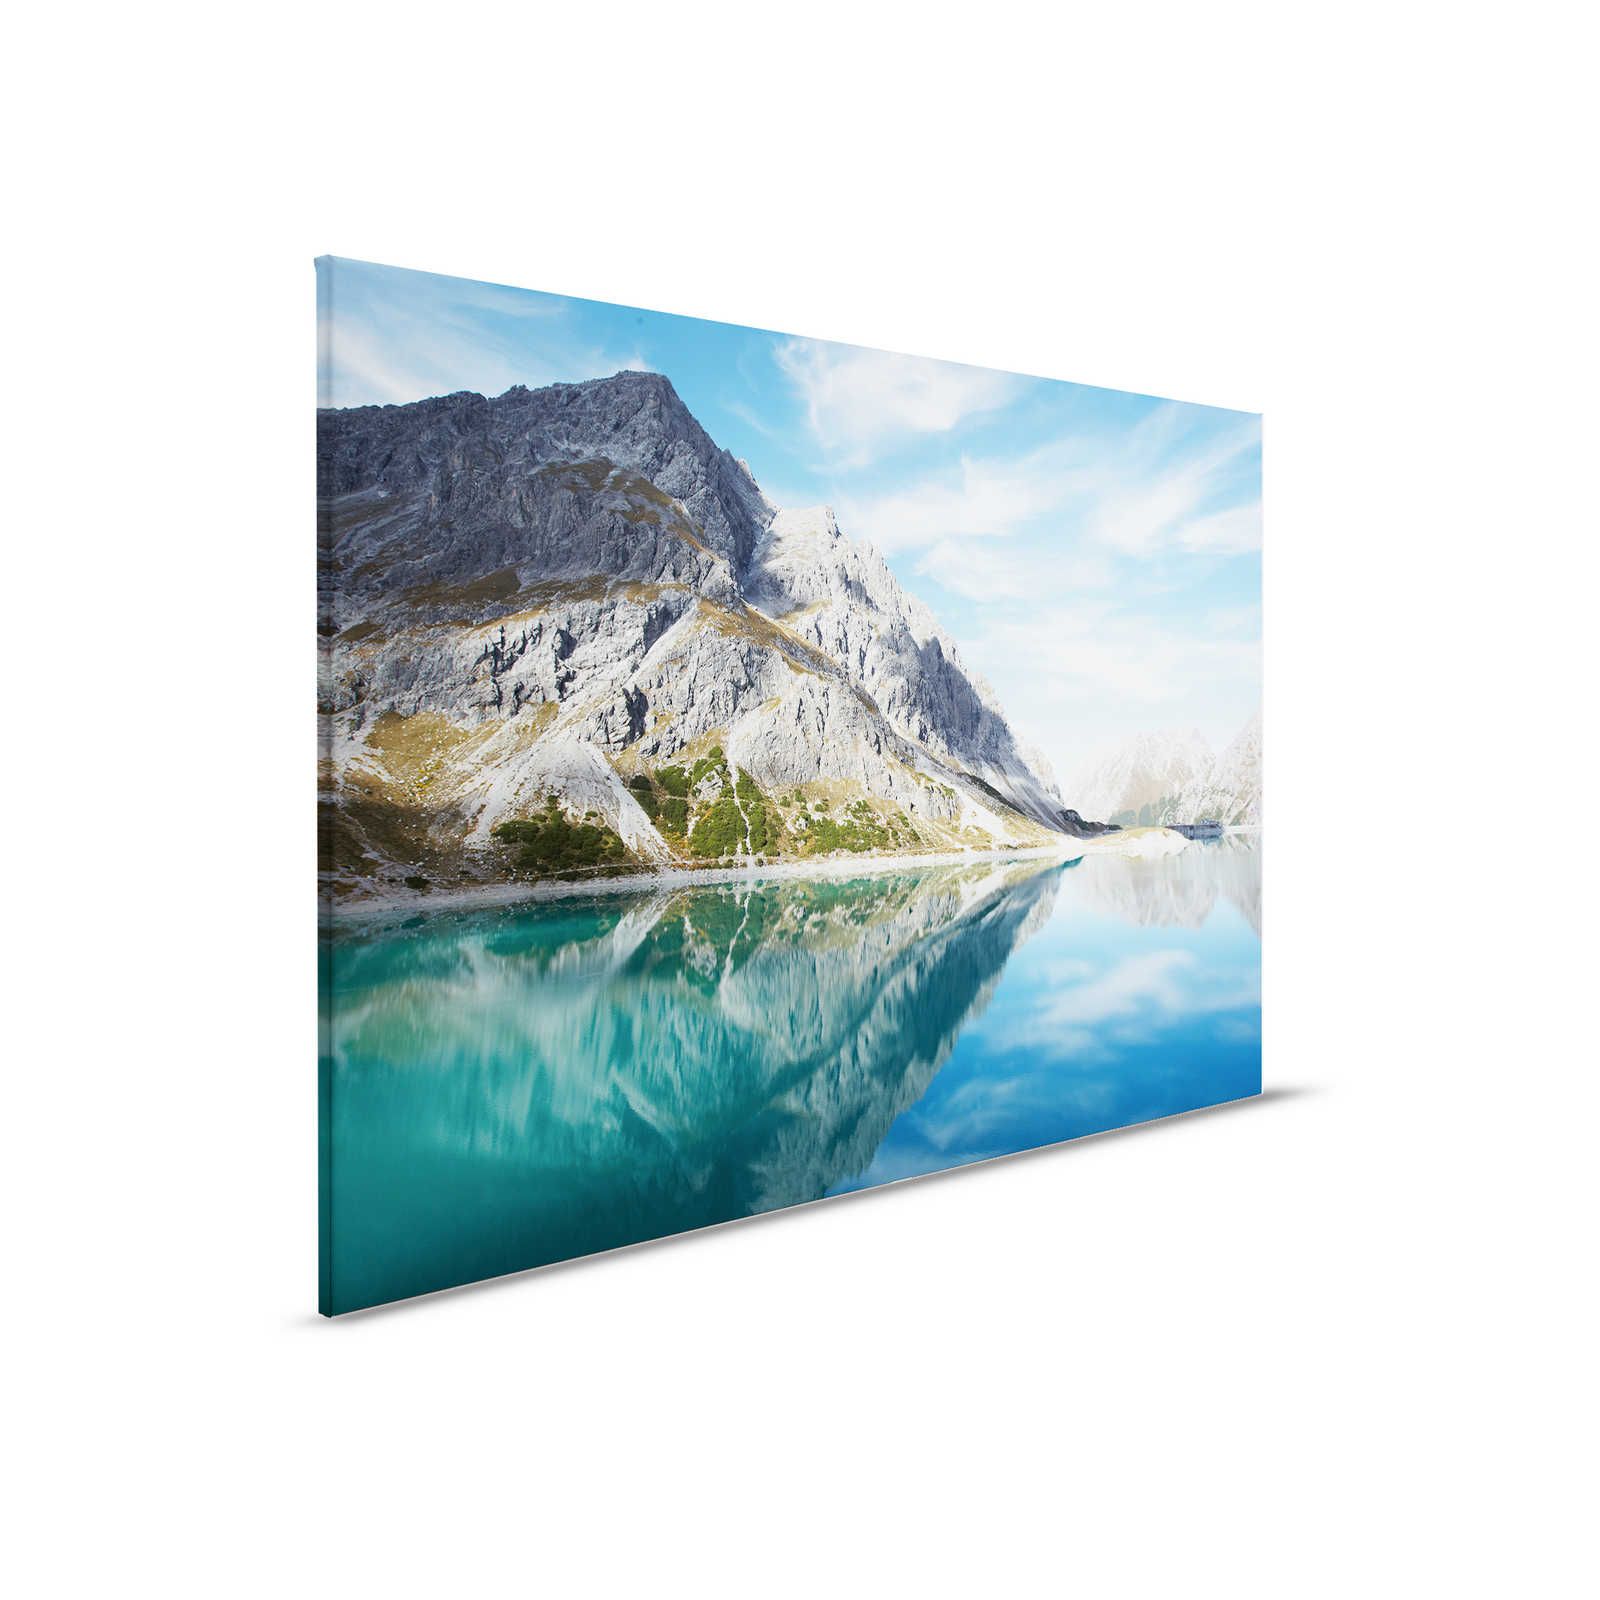 Mountain lake clear - Canvas painting with natural mountain panorama - 0,90 m x 0,60 m
